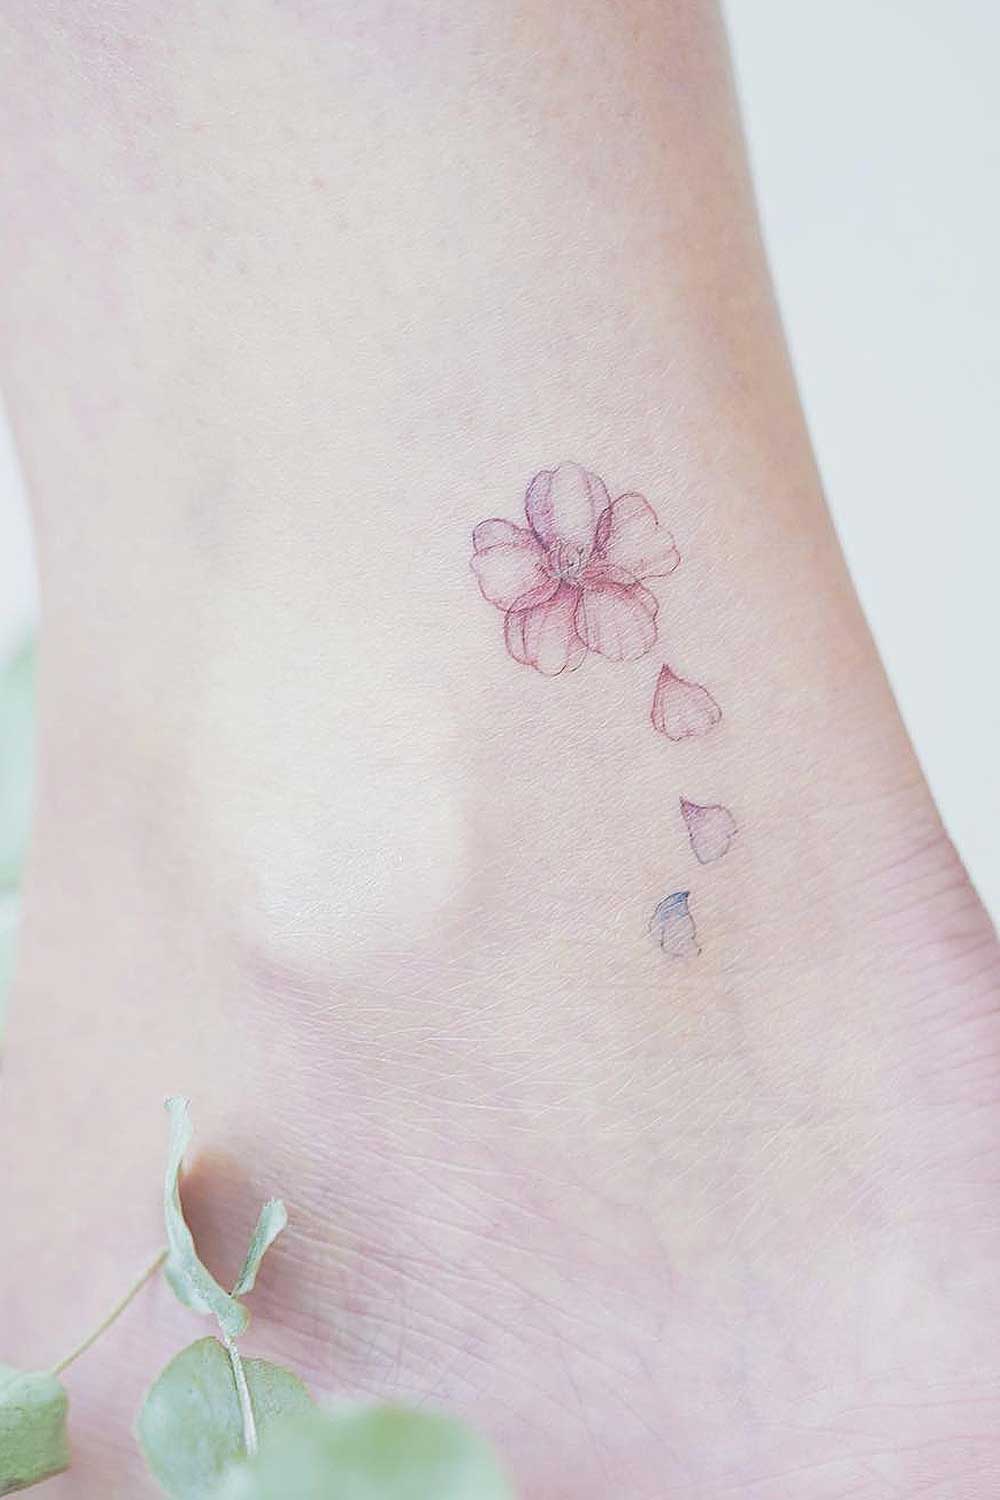 An Average Cost of Cherry Blossom Tattoo